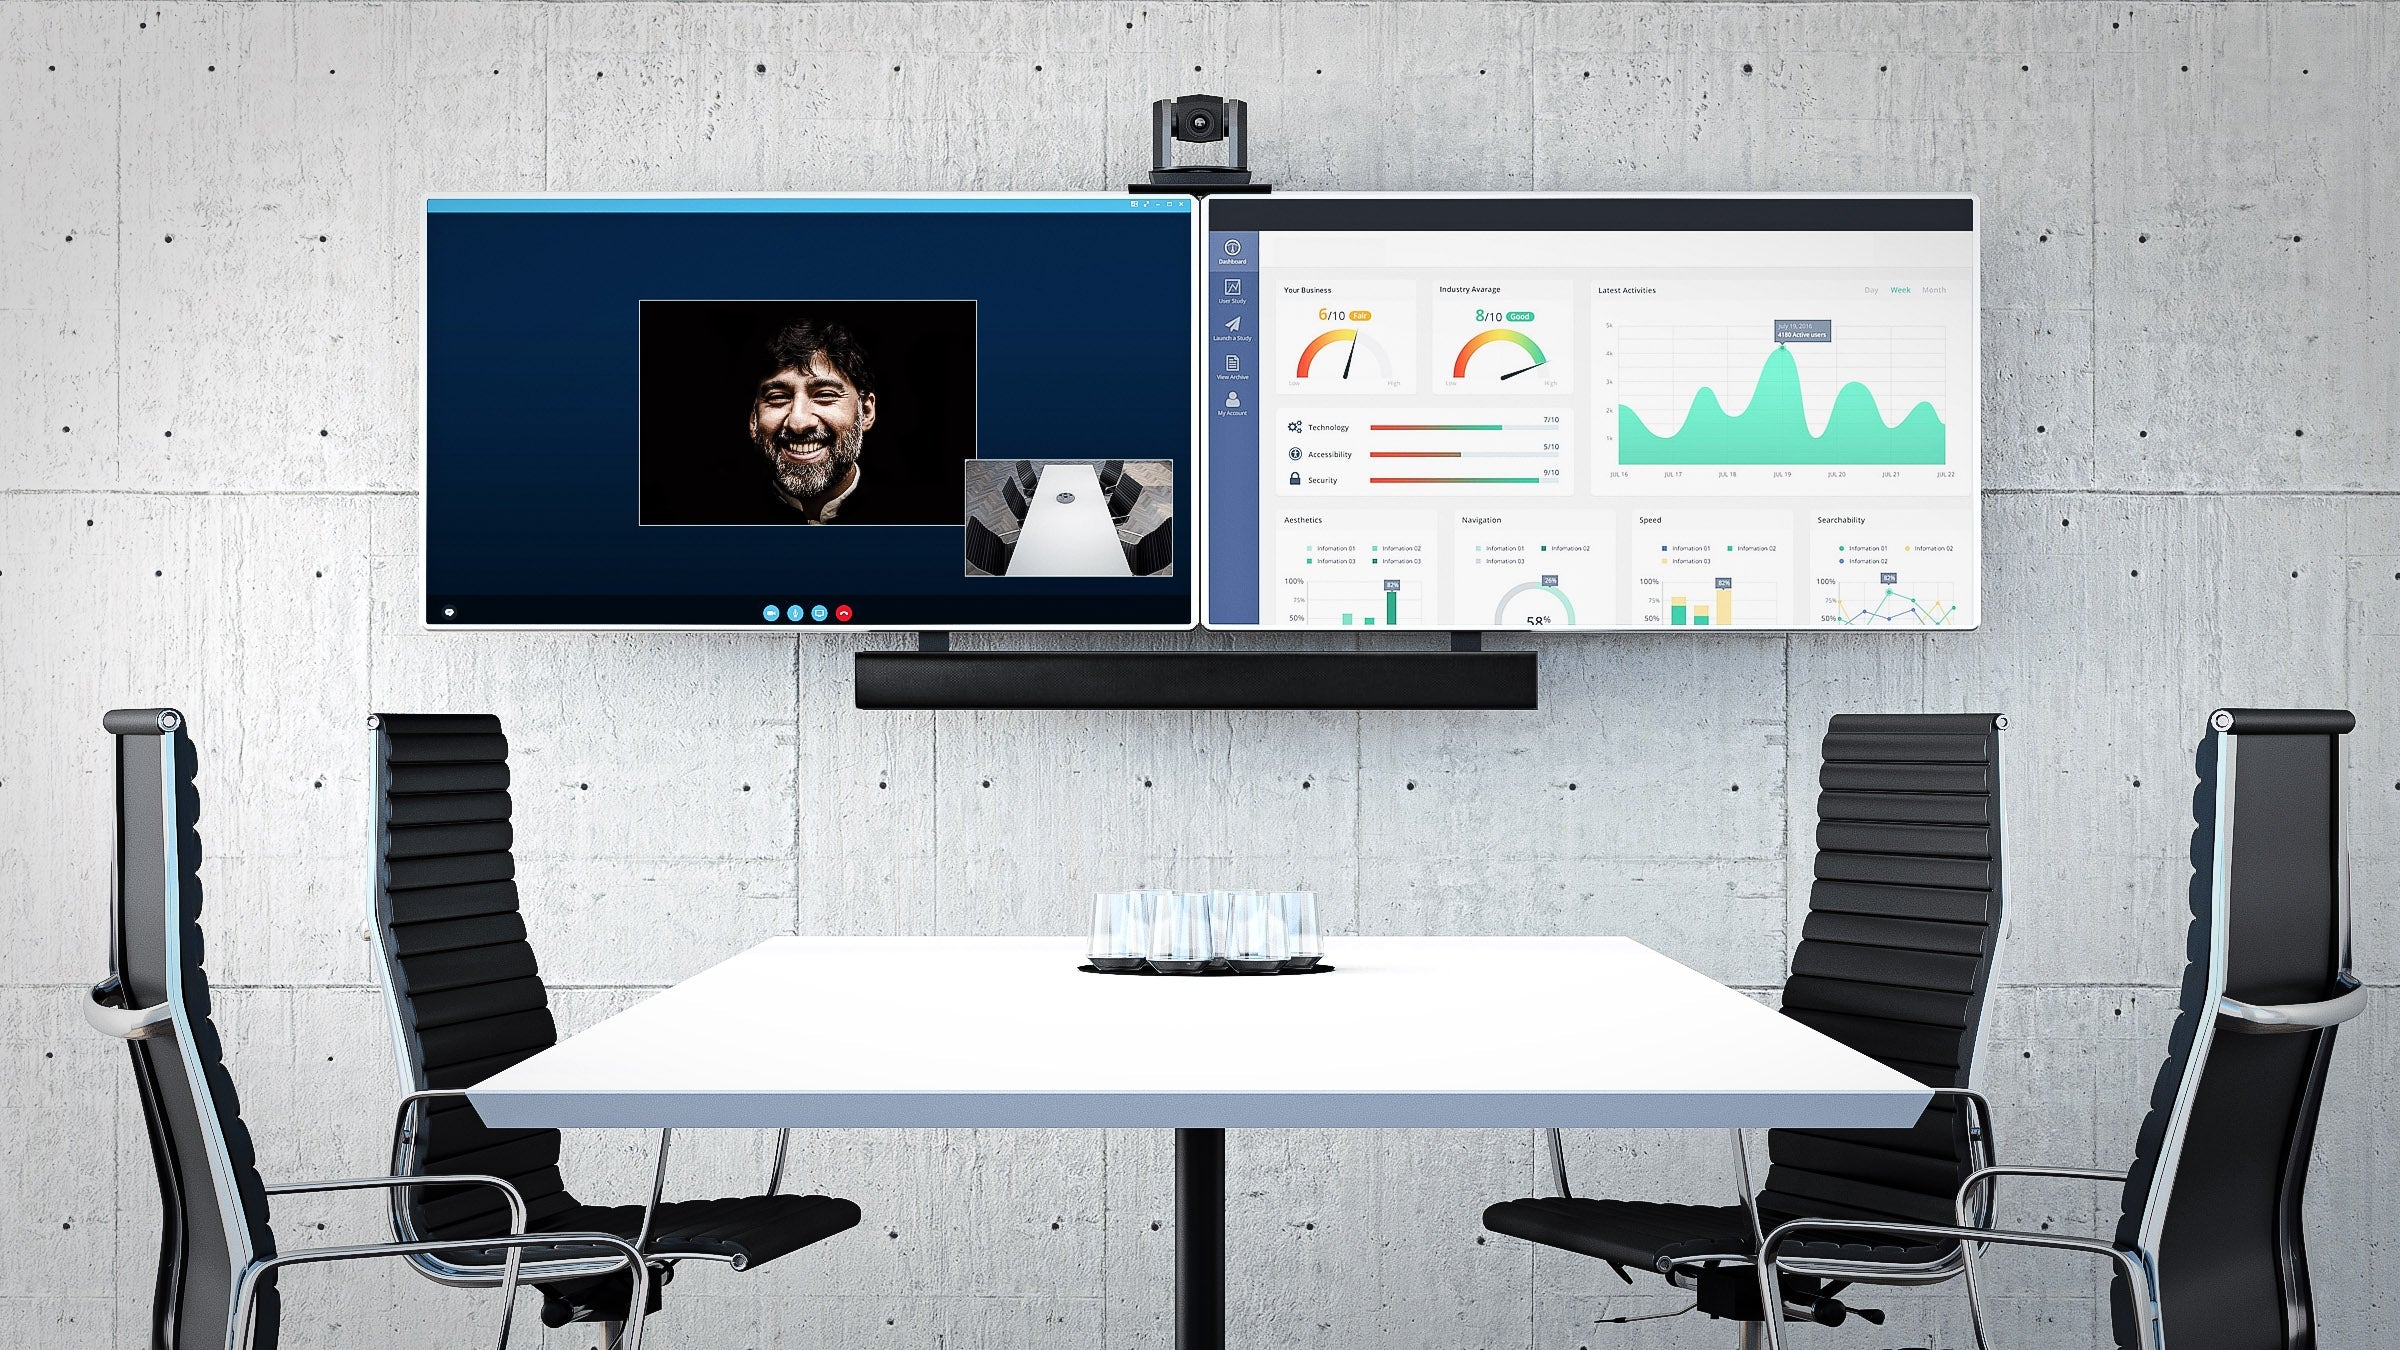 Dual-Screen Video Conference Mount System with Camera and Codec/Soundbar Shelves Up to 55" screens